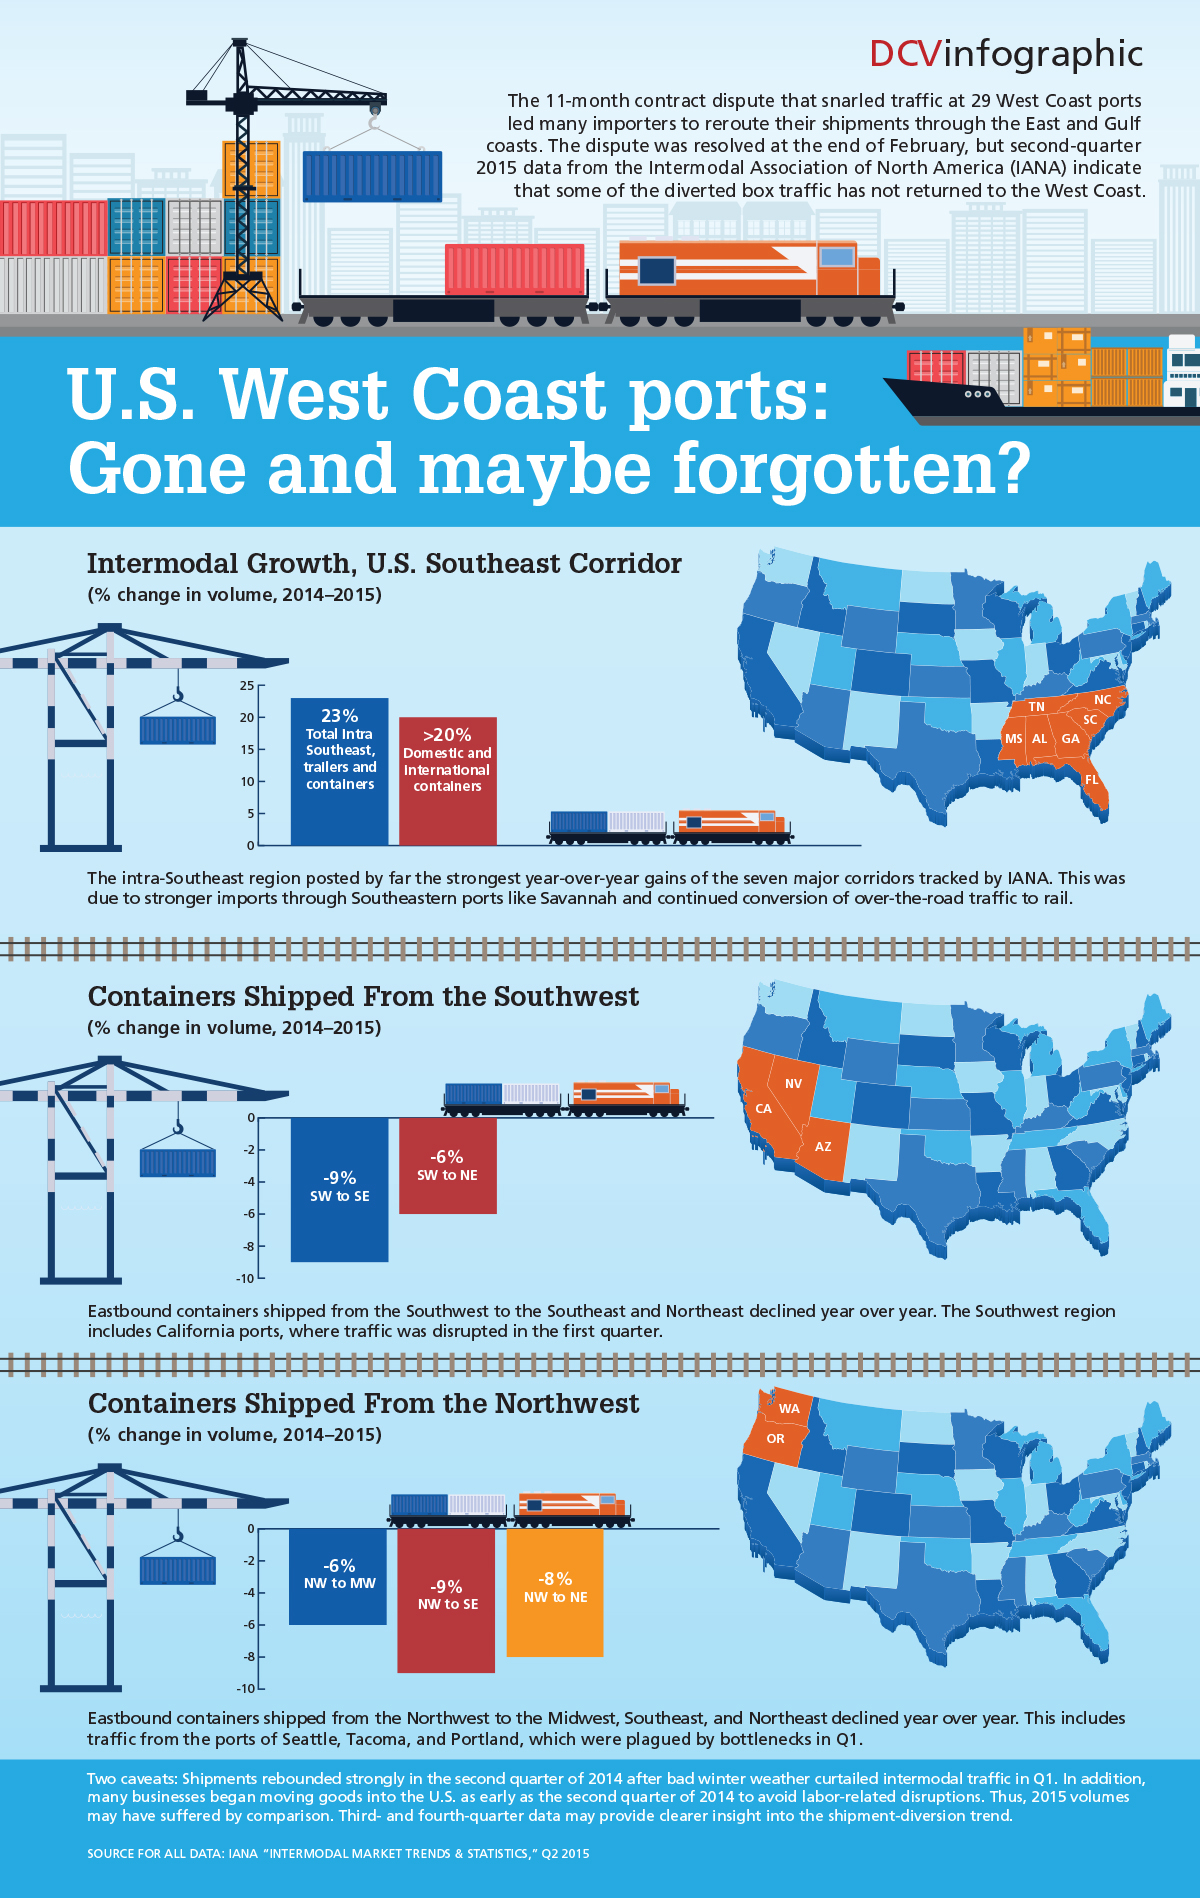 Infographic: U.S. West Coast ports: Gone and maybe forgotten? The 11-month contract dispute that snarled traffic at 29 West Coast ports
led many importers to reroute their shipments through the East and Gulf coasts. The dispute was resolved at the end of February, but second-quarter 2015 data from the Intermodal Association of North America (IANA) indicate
that some of the diverted box traffic has not returned to the West Coast.